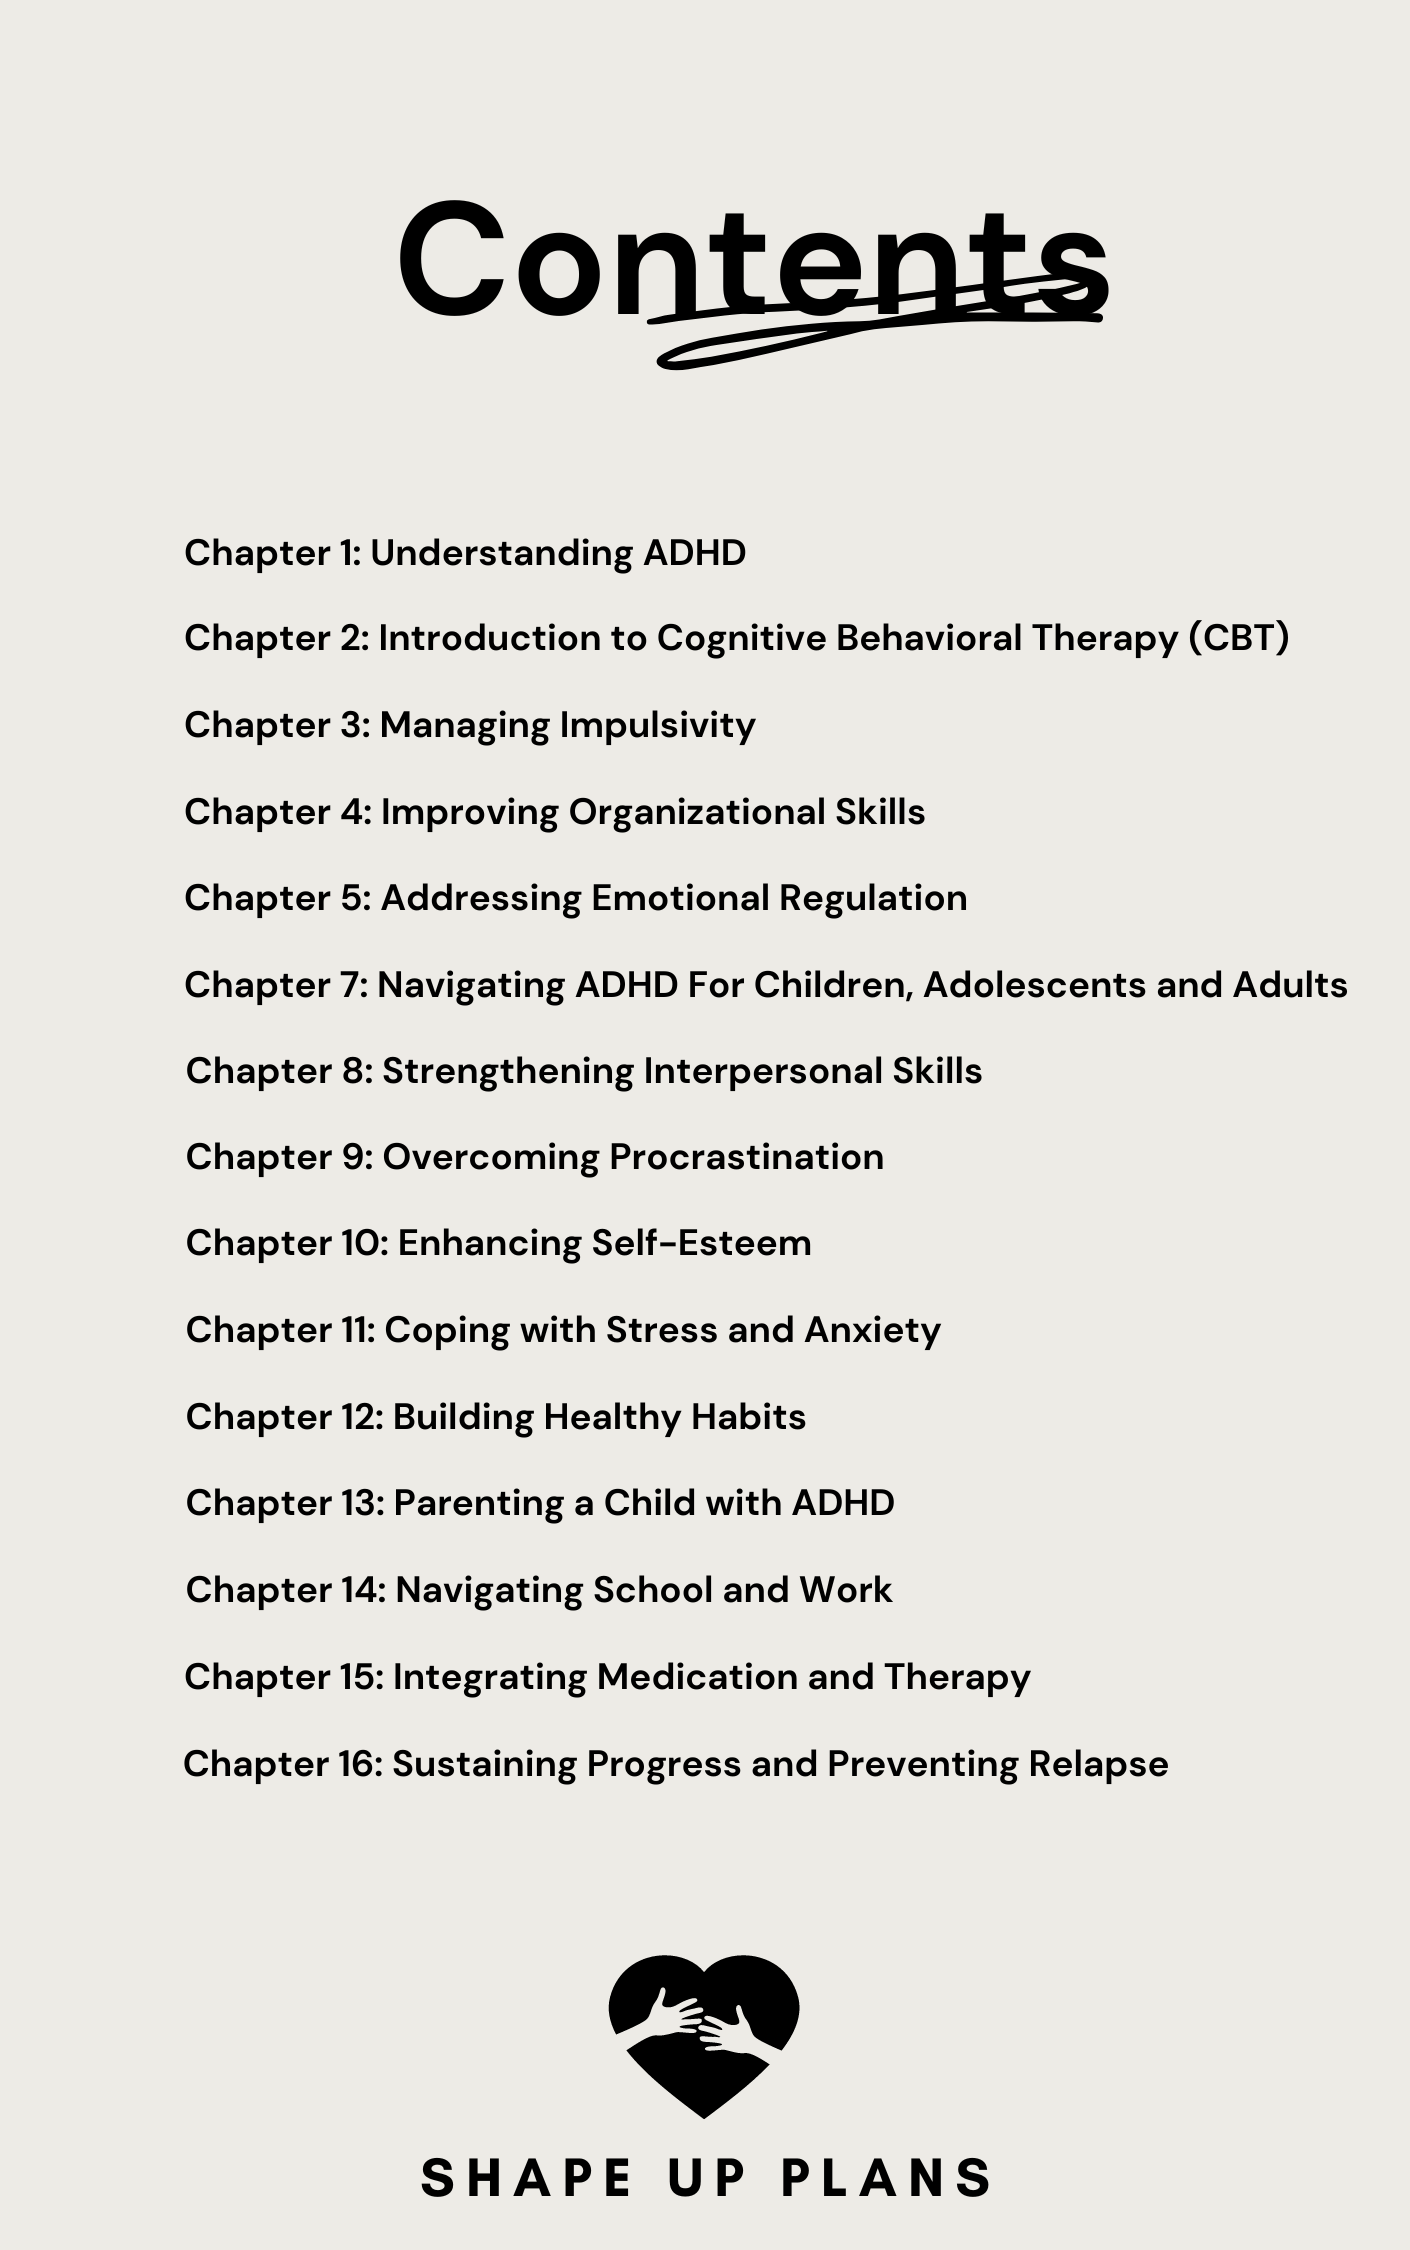 ADHD Management and CBT: Strategies for Success in Life, School, and Work